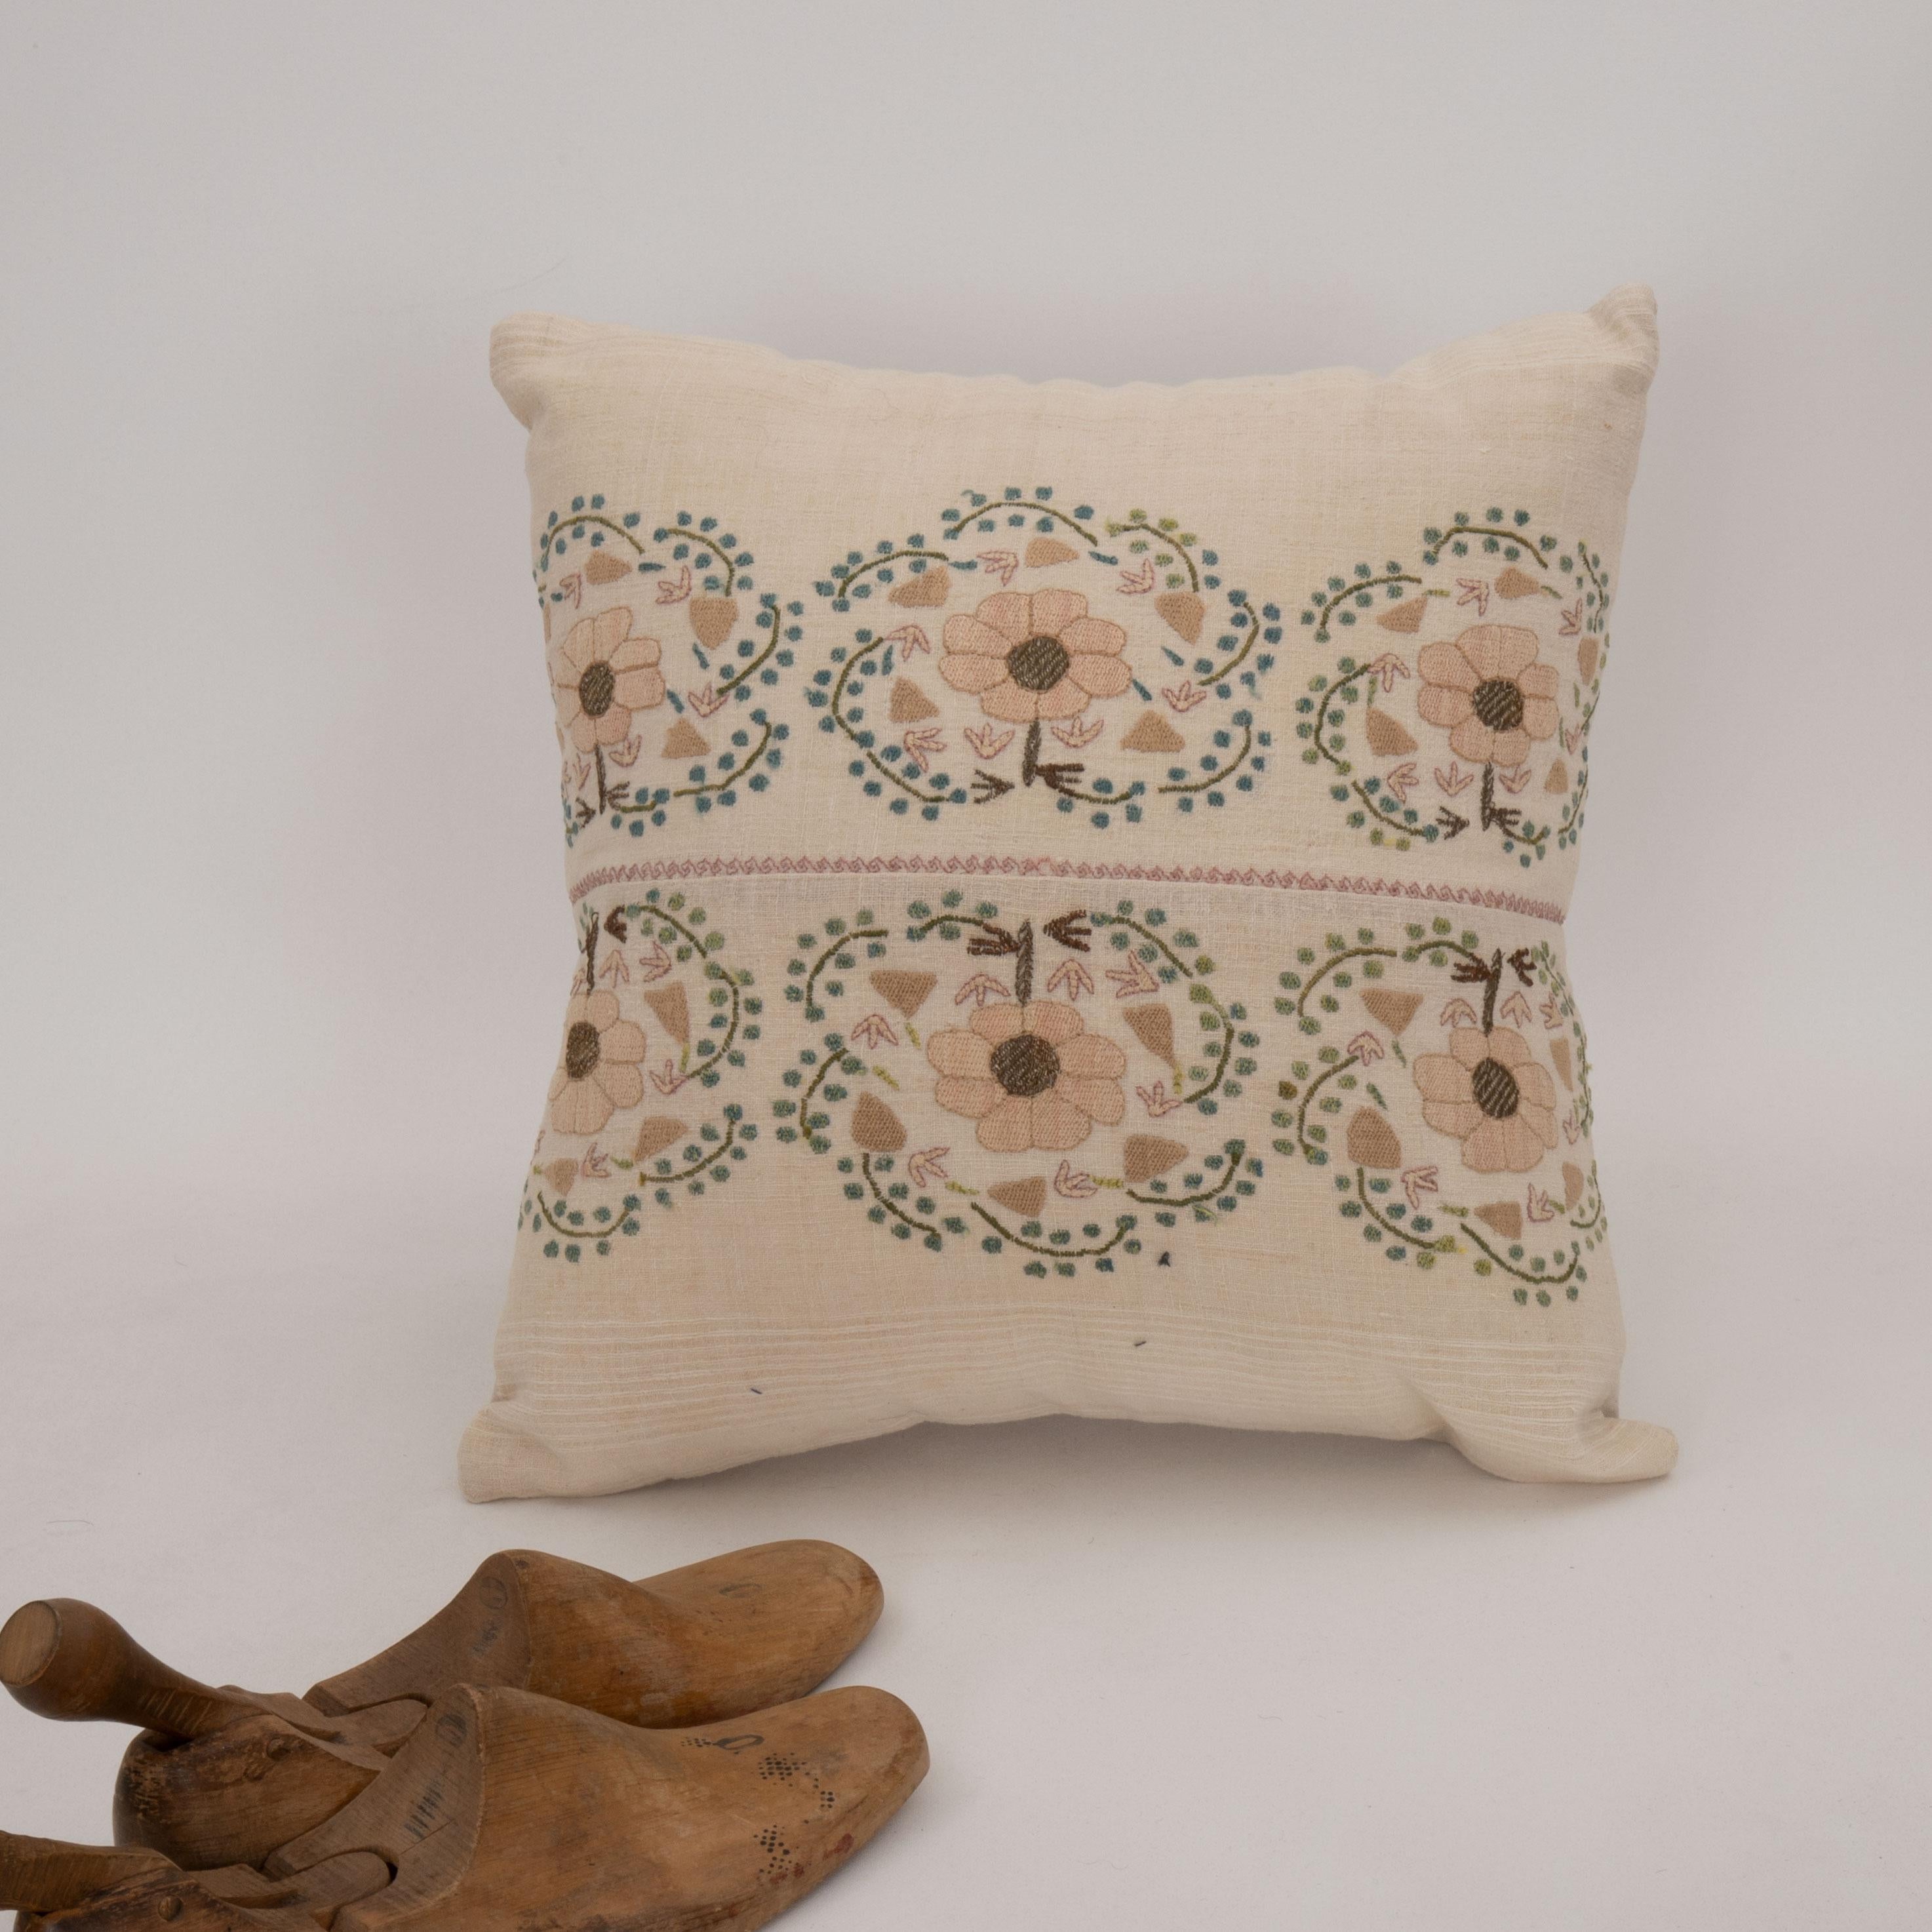 Turkish Pillow Case Made from an Antique Ottoman Embroidery For Sale